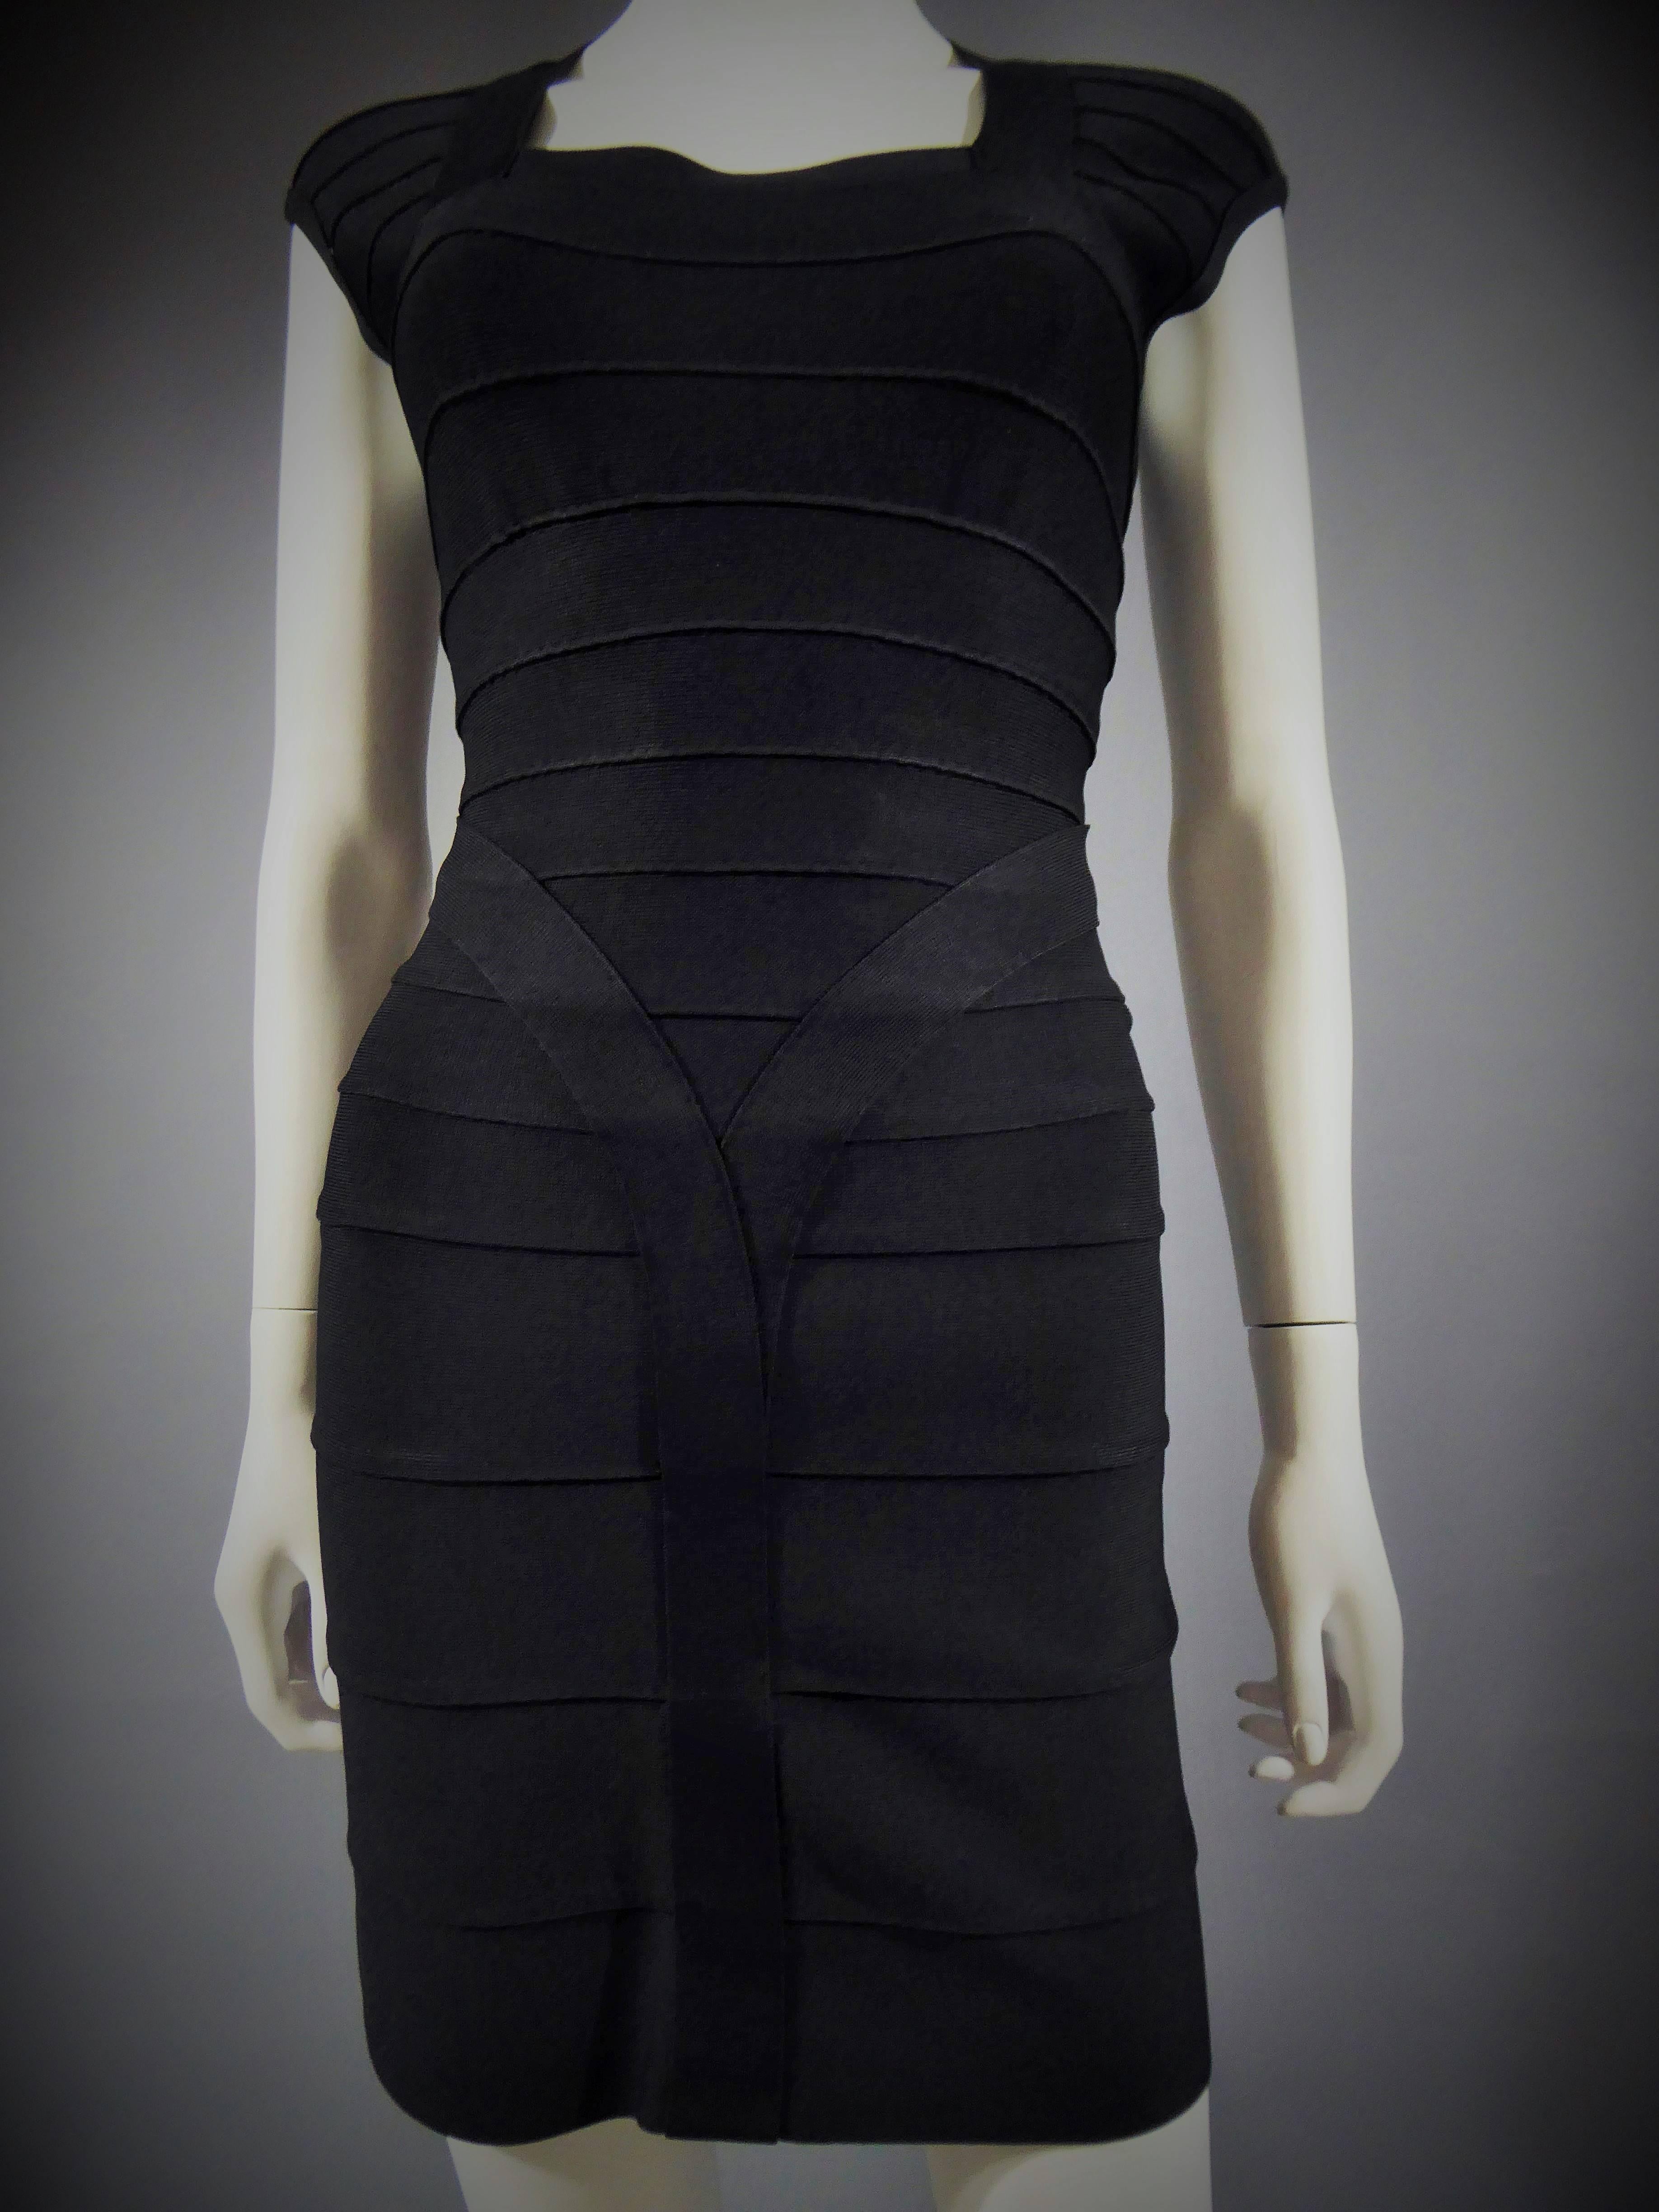 Circa 1995

France

Hervé Léger black mini dress. Bodycon dress with short sleeves made from an assembly of stretch fabric bands commonly used in the field of lingerie. Square collar, marked size. Very good condition. Size 36 french.

Dimensions: